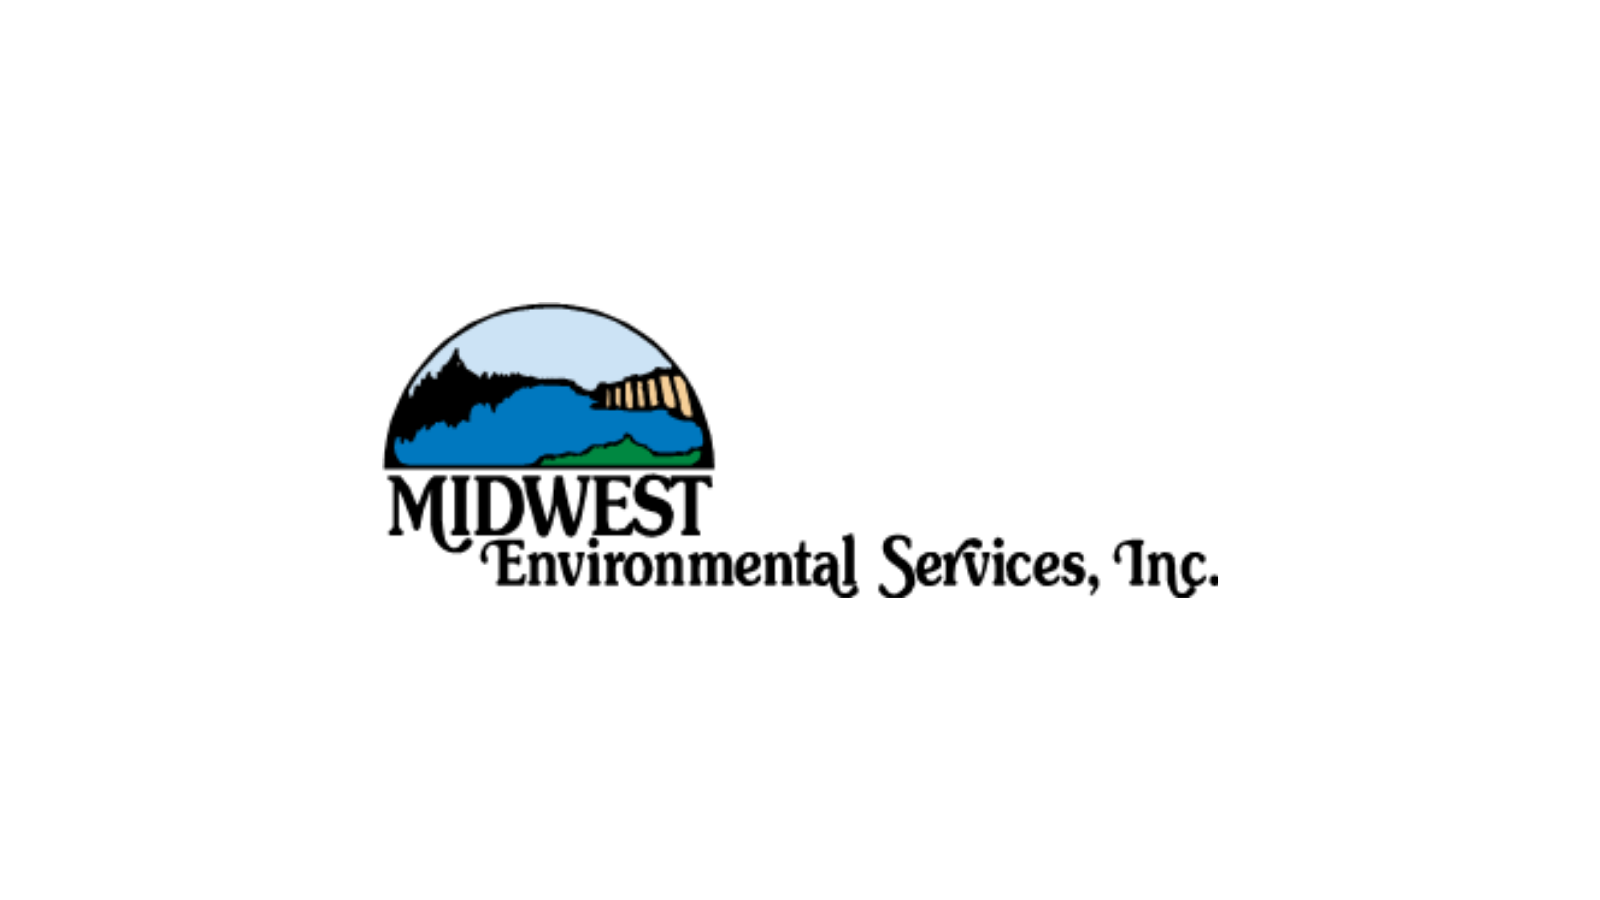 Midwest Environmental Services